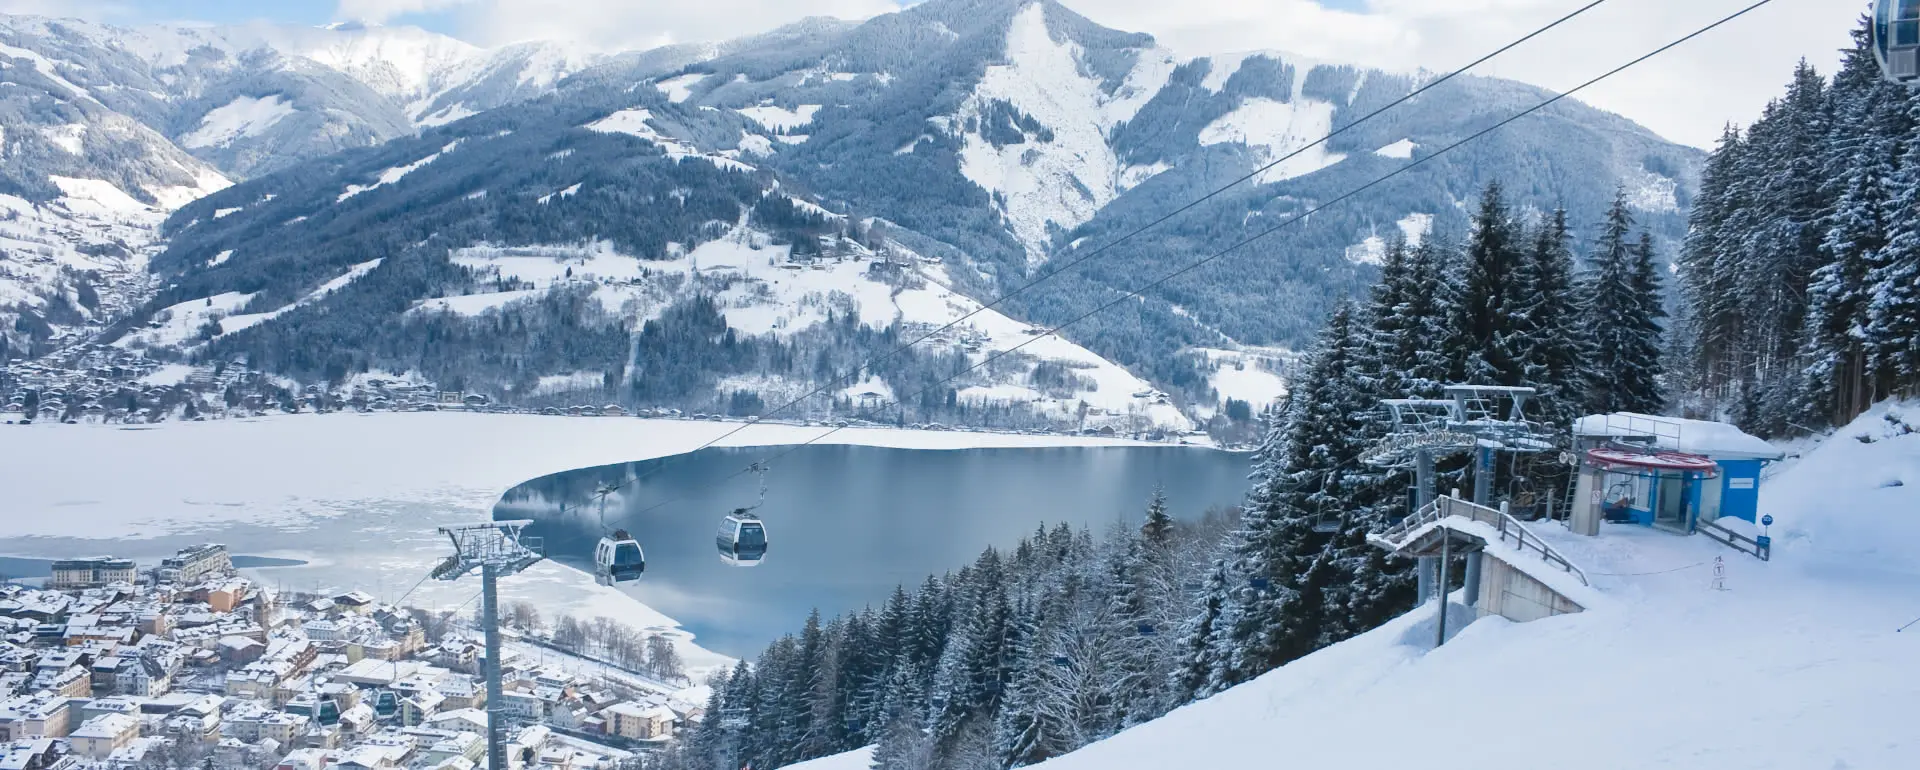 Zell am See - the destination with youth hostels